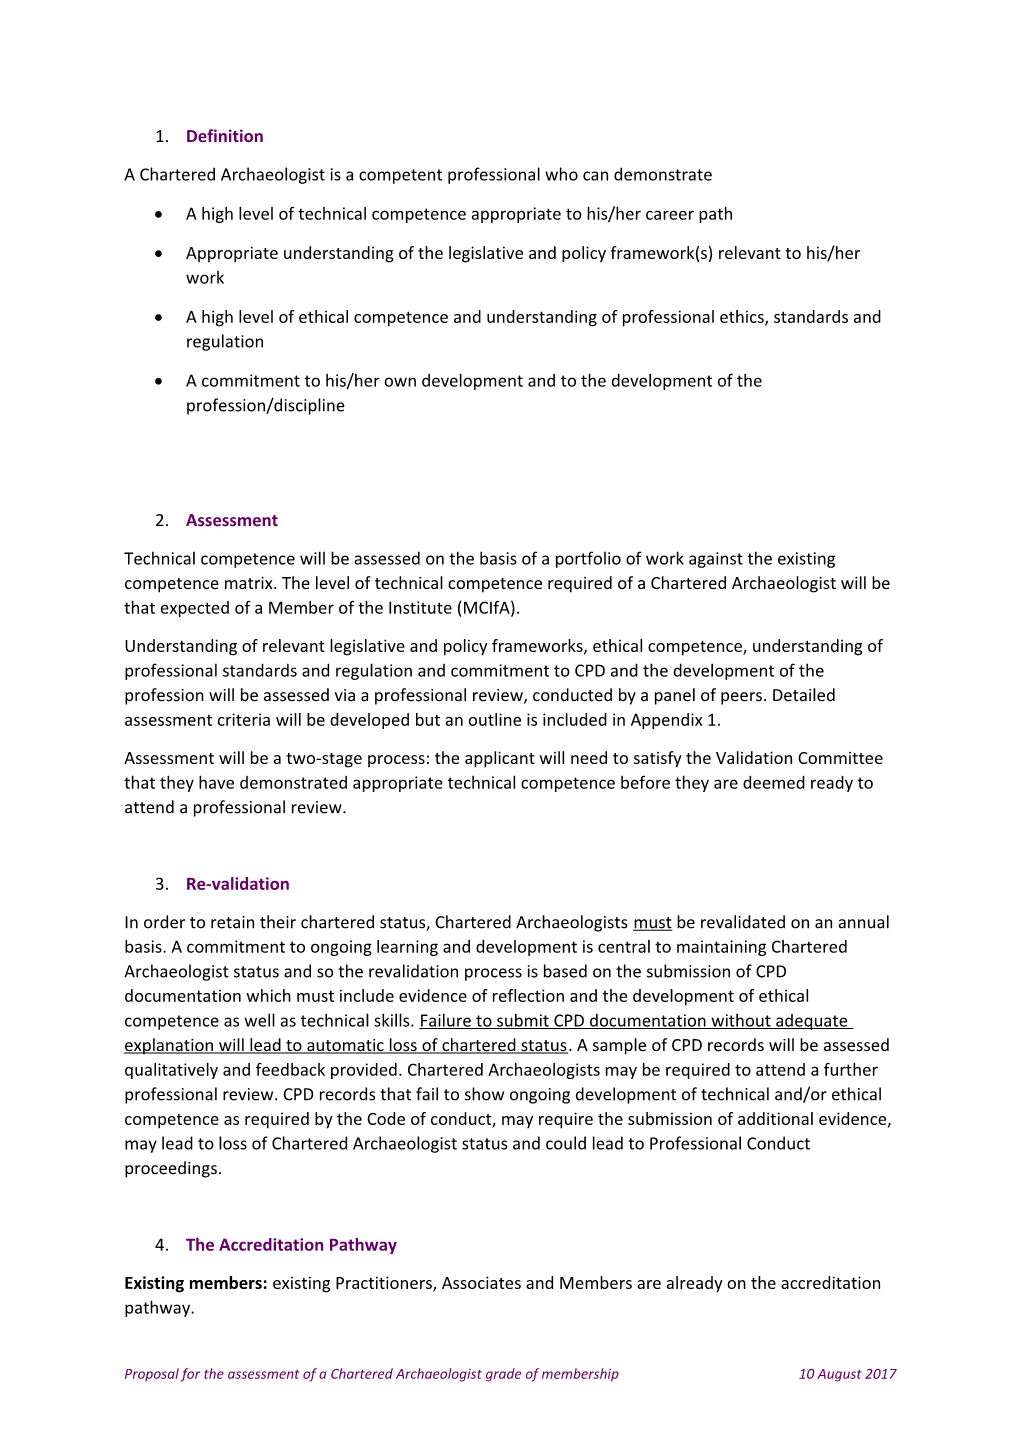 Draft Proposal for the Assessment of a Chartered Archaeologist Grade of Membership